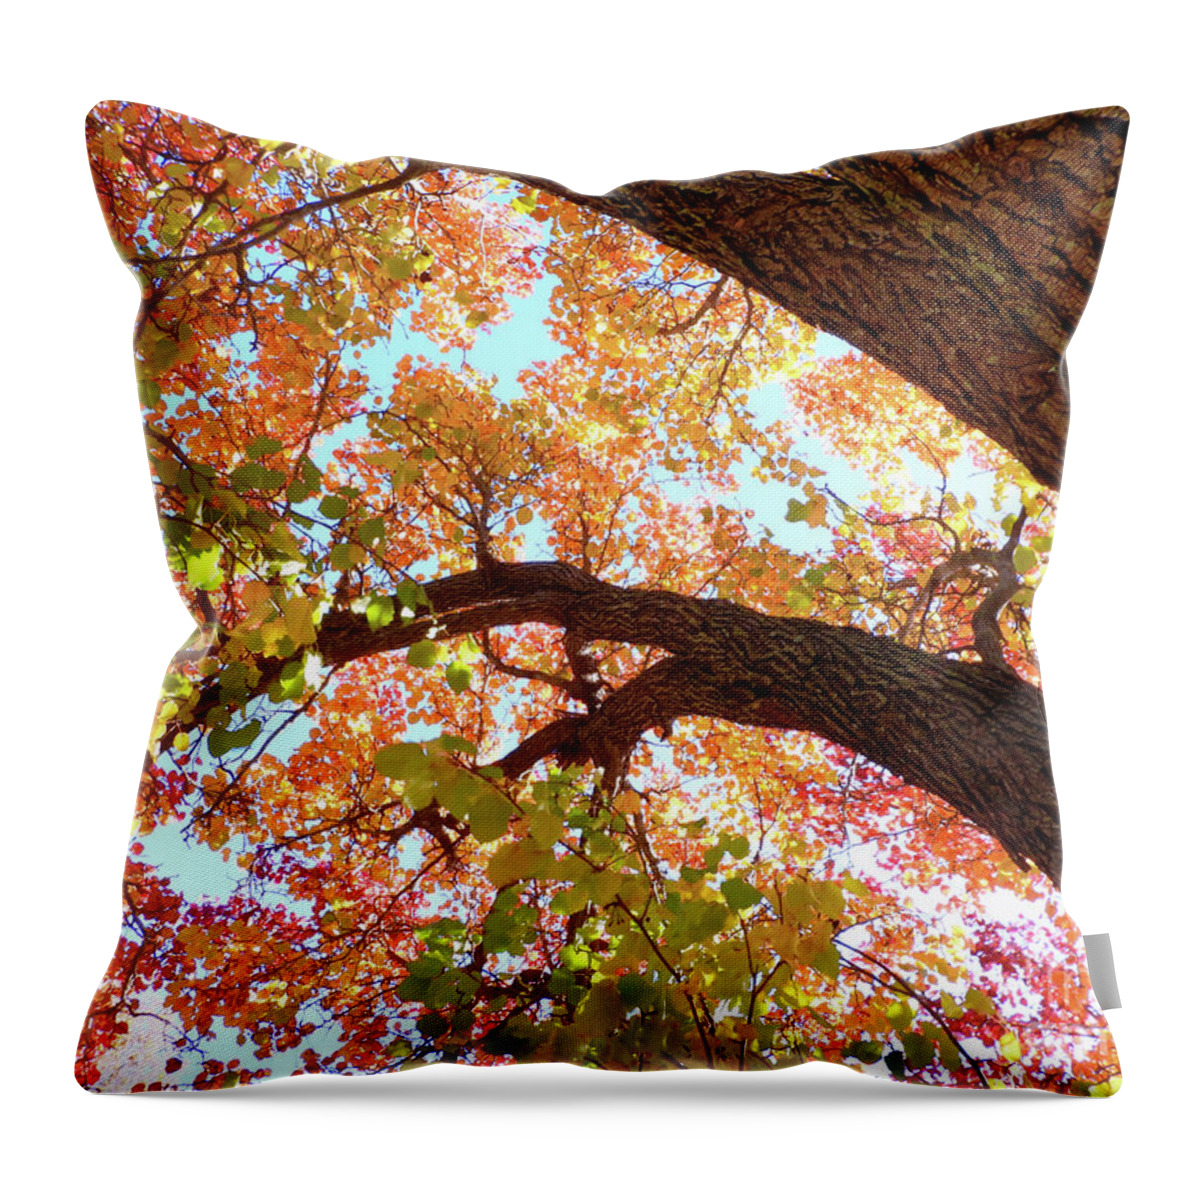 Autumn Throw Pillow featuring the photograph A Look Up by Scott Cameron